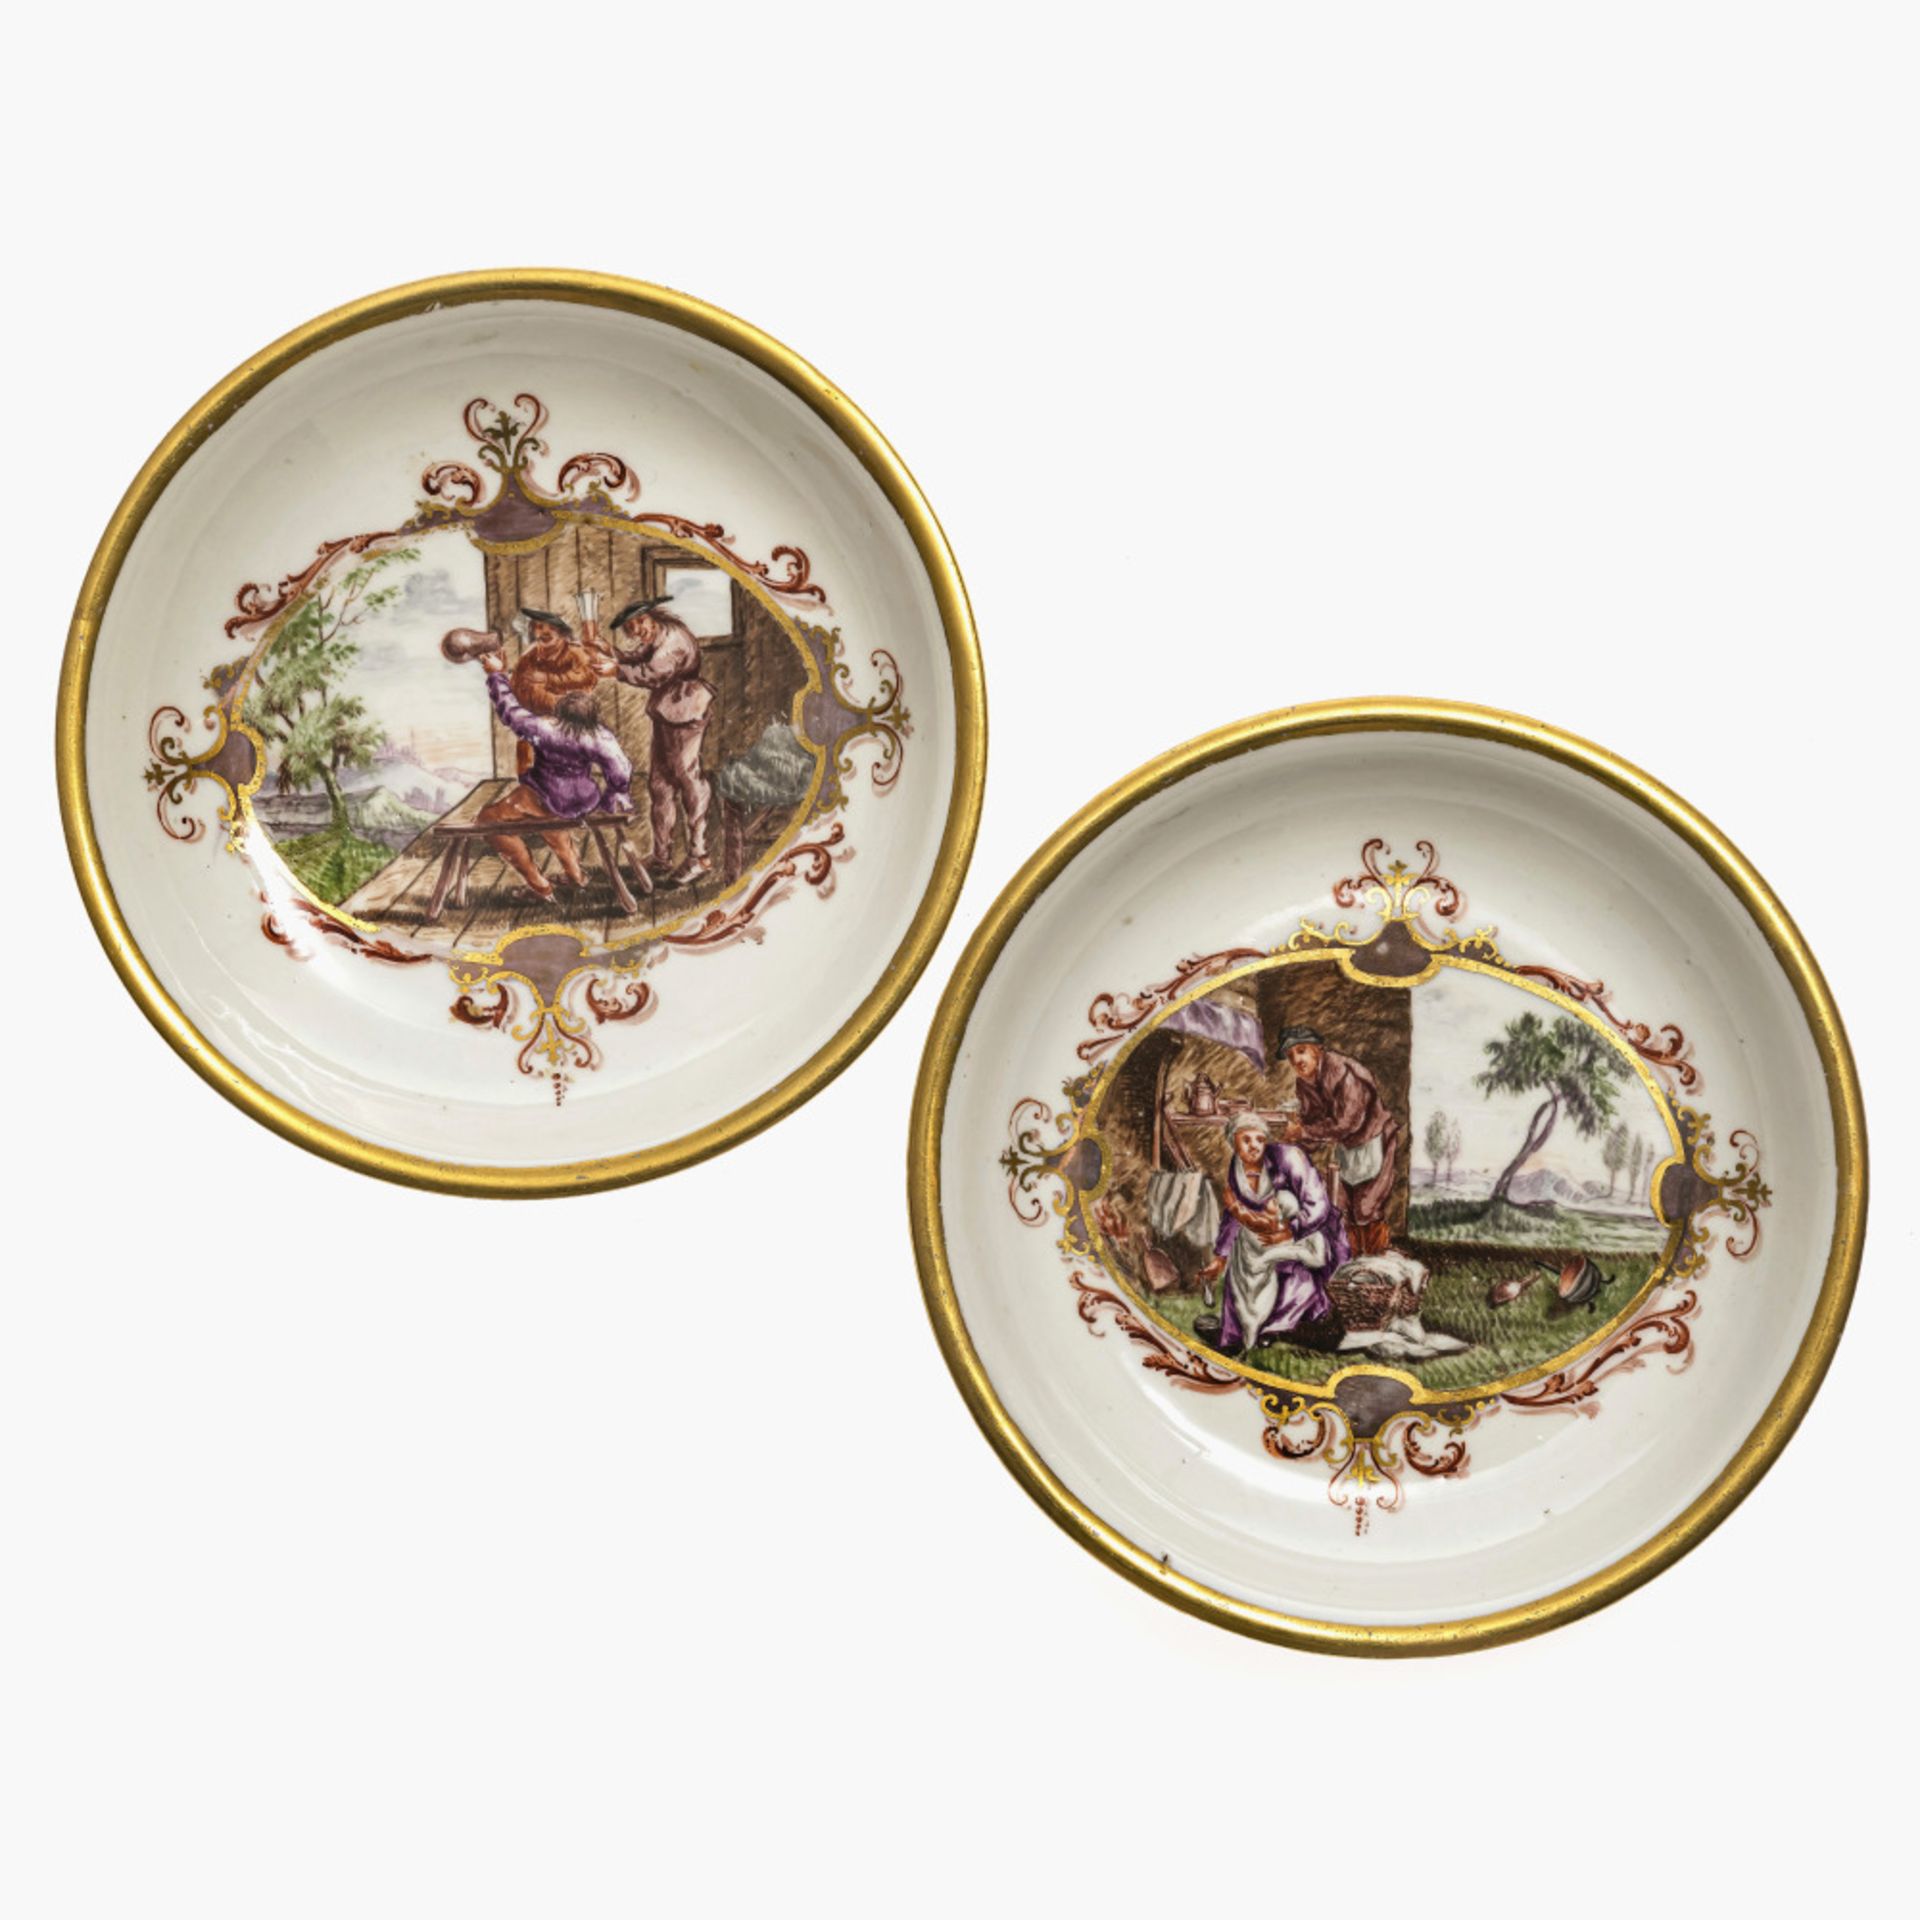 Two saucers - Meissen, circa 1725, painting attributed to Johann Gregorius Hoeroldt